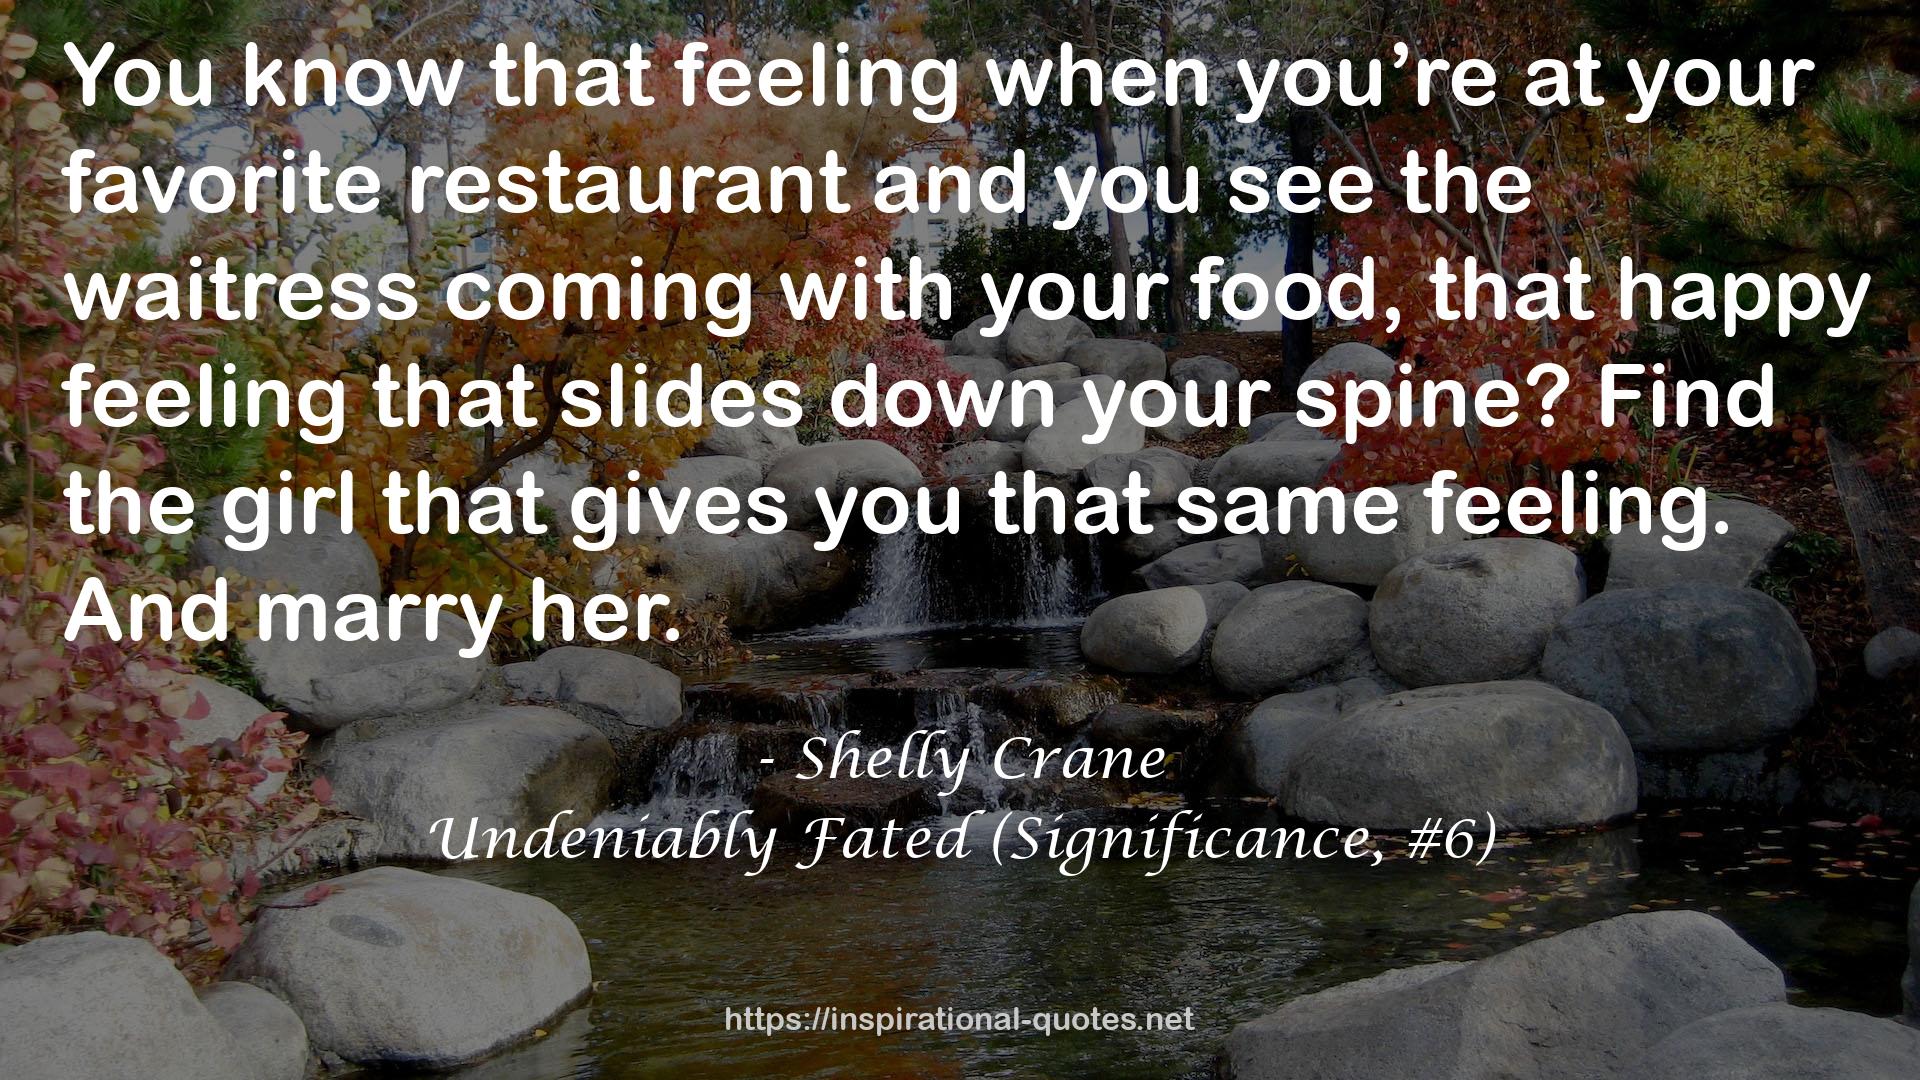 Undeniably Fated (Significance, #6) QUOTES